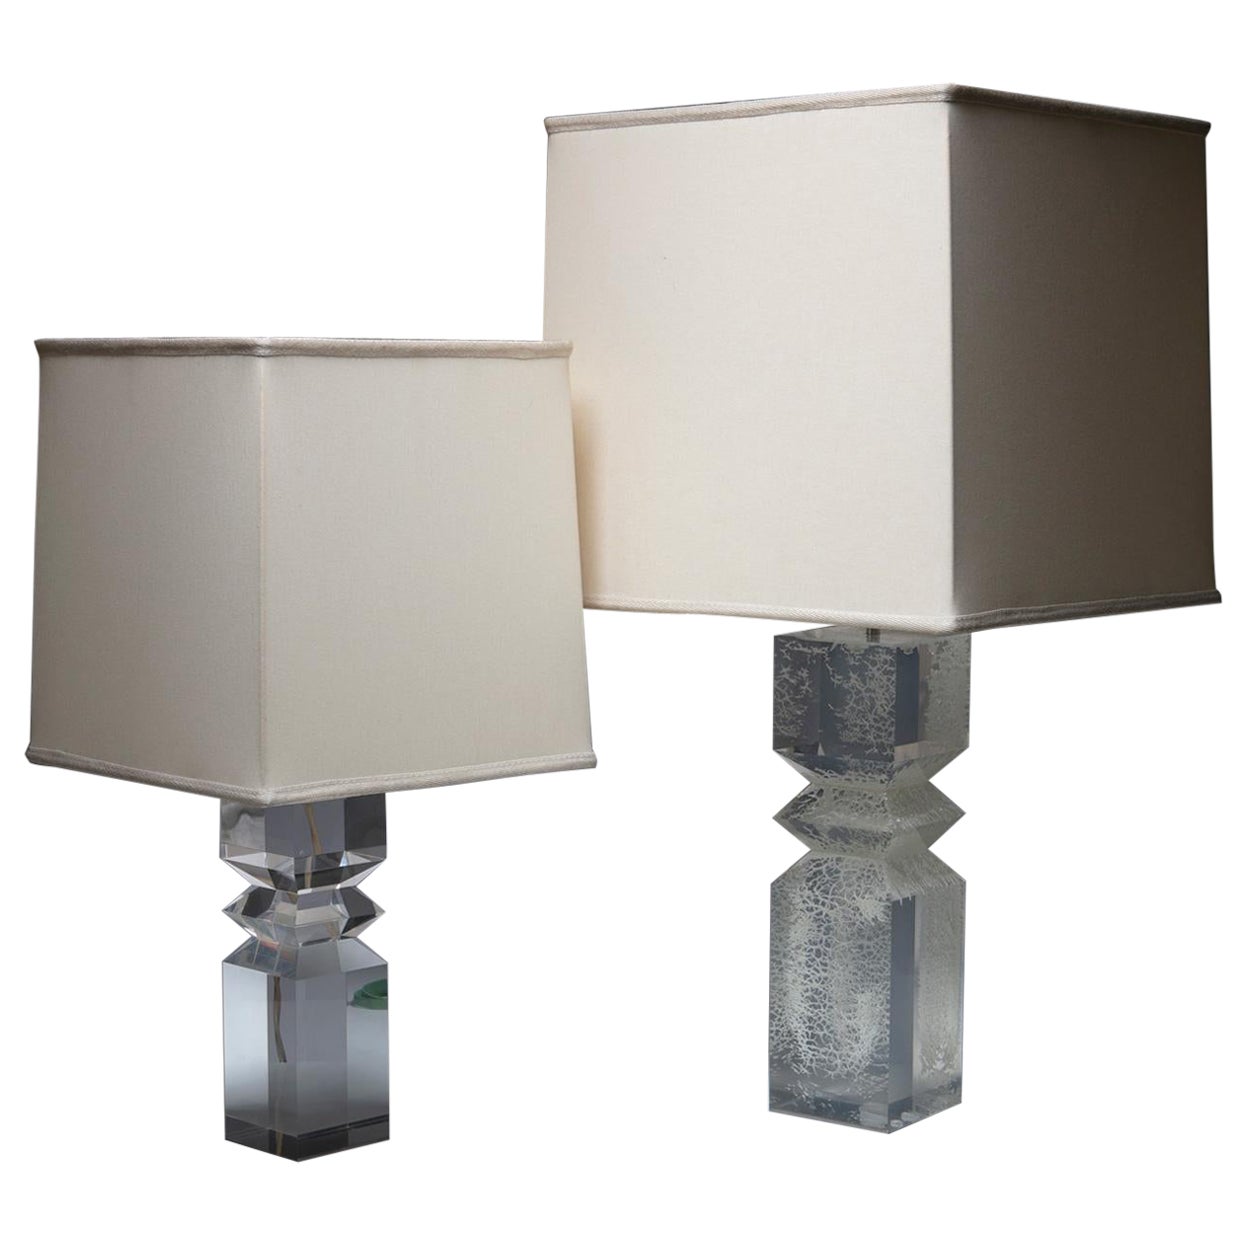 Set of Two Plexiglass Table Lamps by Alessio Tasca for Fusina, Italy, 1970s For Sale